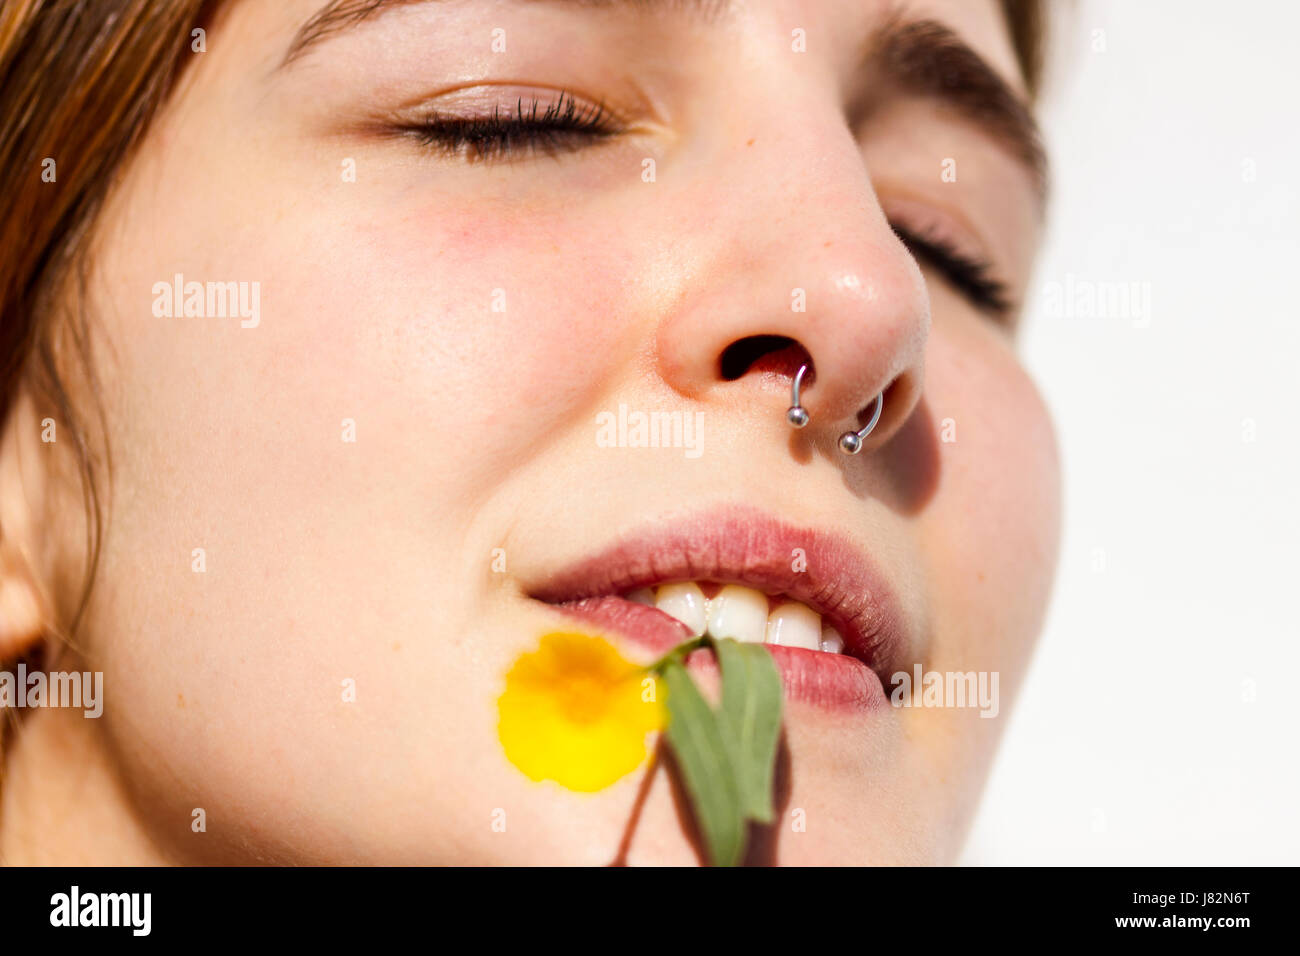 Attractive female with a nose ring and lip piercing Stock Photo by  ©jeffbanke 10971593